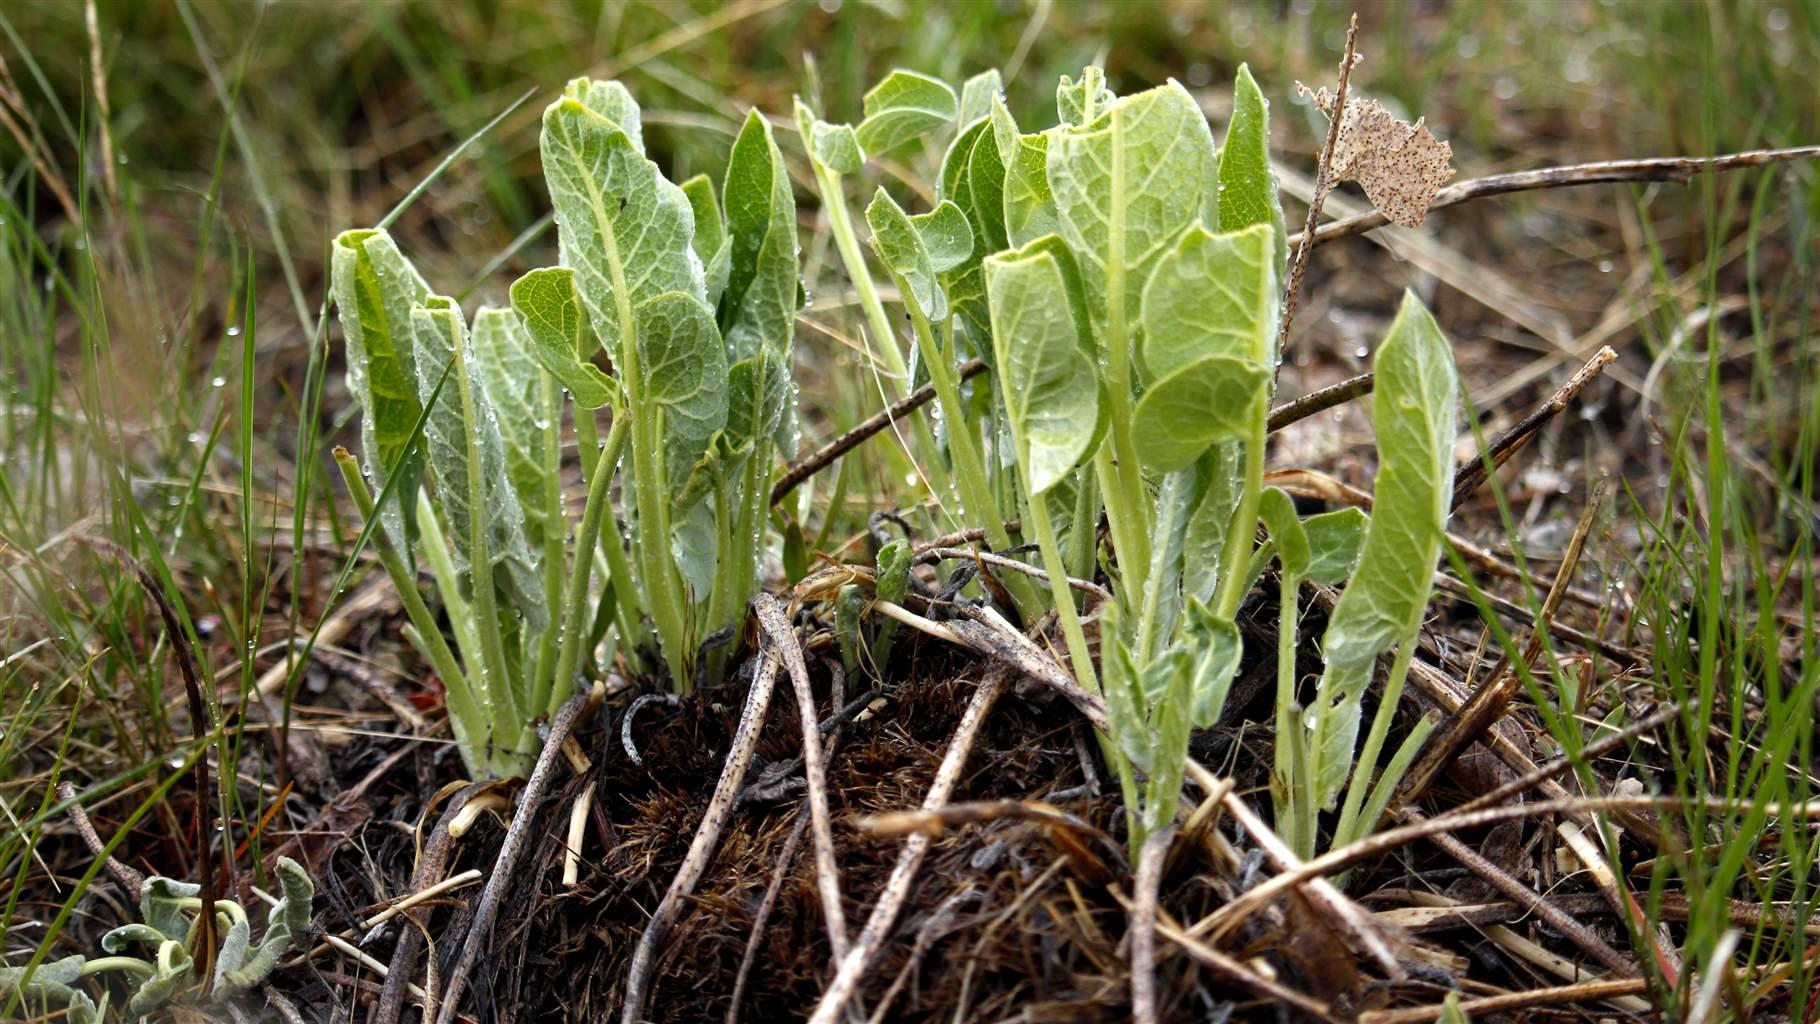 A cluster of arrowleaf balsamroot that has been nibbled on. Elk, pronghorn, and other ungulates will graze on these and other young plants in the spring.